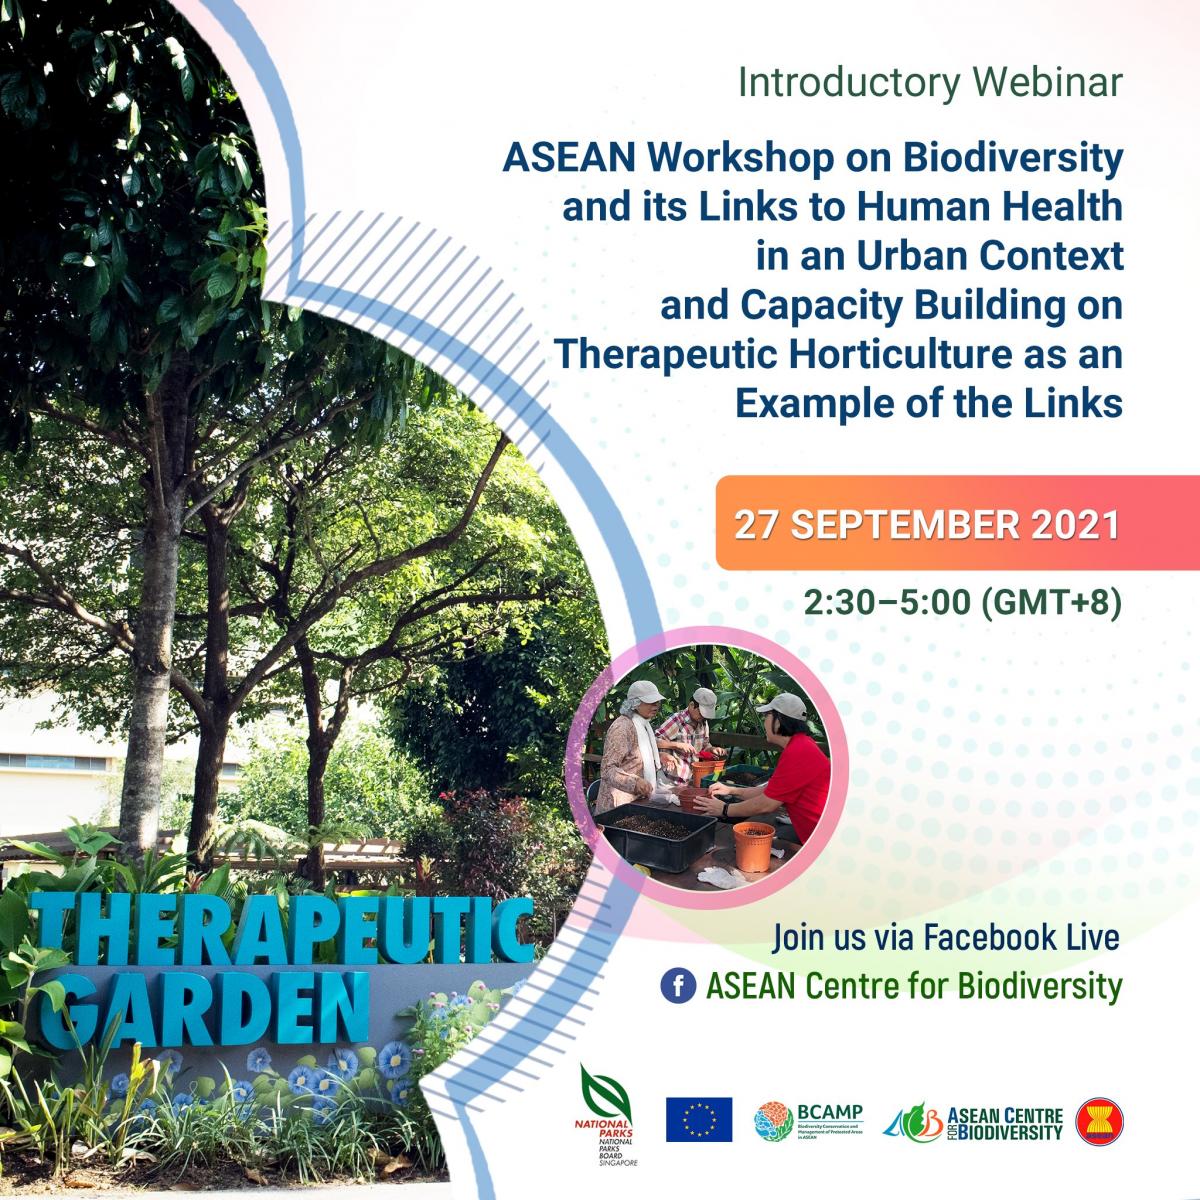 Introductory Webinar for the ASEAN Workshop on Biodiversity and its Links to Human Health in an Urban Context and Capacity Building on Therapeutic Horticulture as an Example of the Links